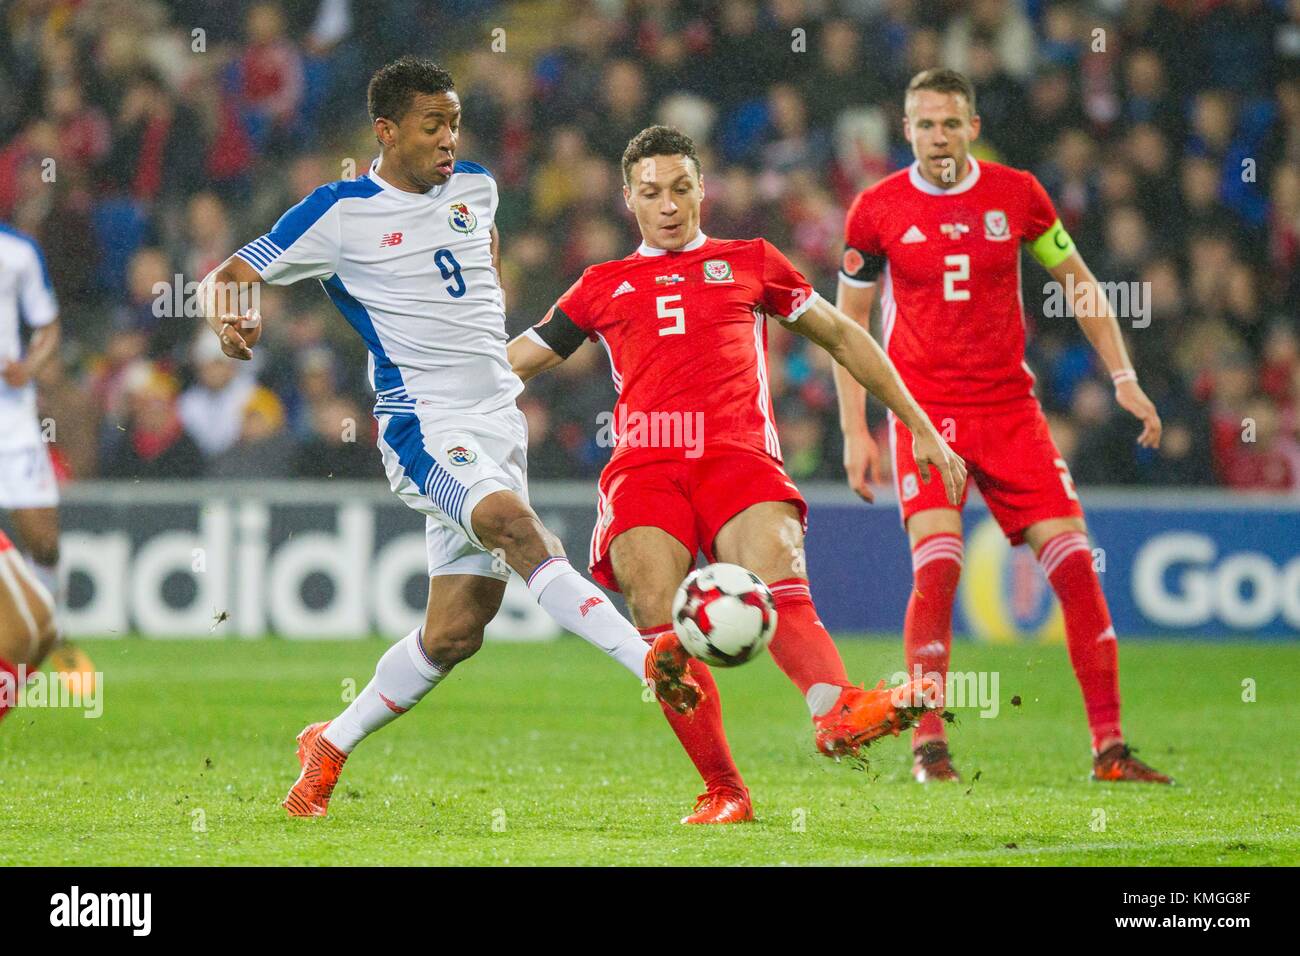 Cardiff, Wales, UK, 14th November 2017: James Chester of Wales clears from Gabriel Torres of Panama during an International friendly match between Wales and Panama at Cardiff City Stadium. Stock Photo